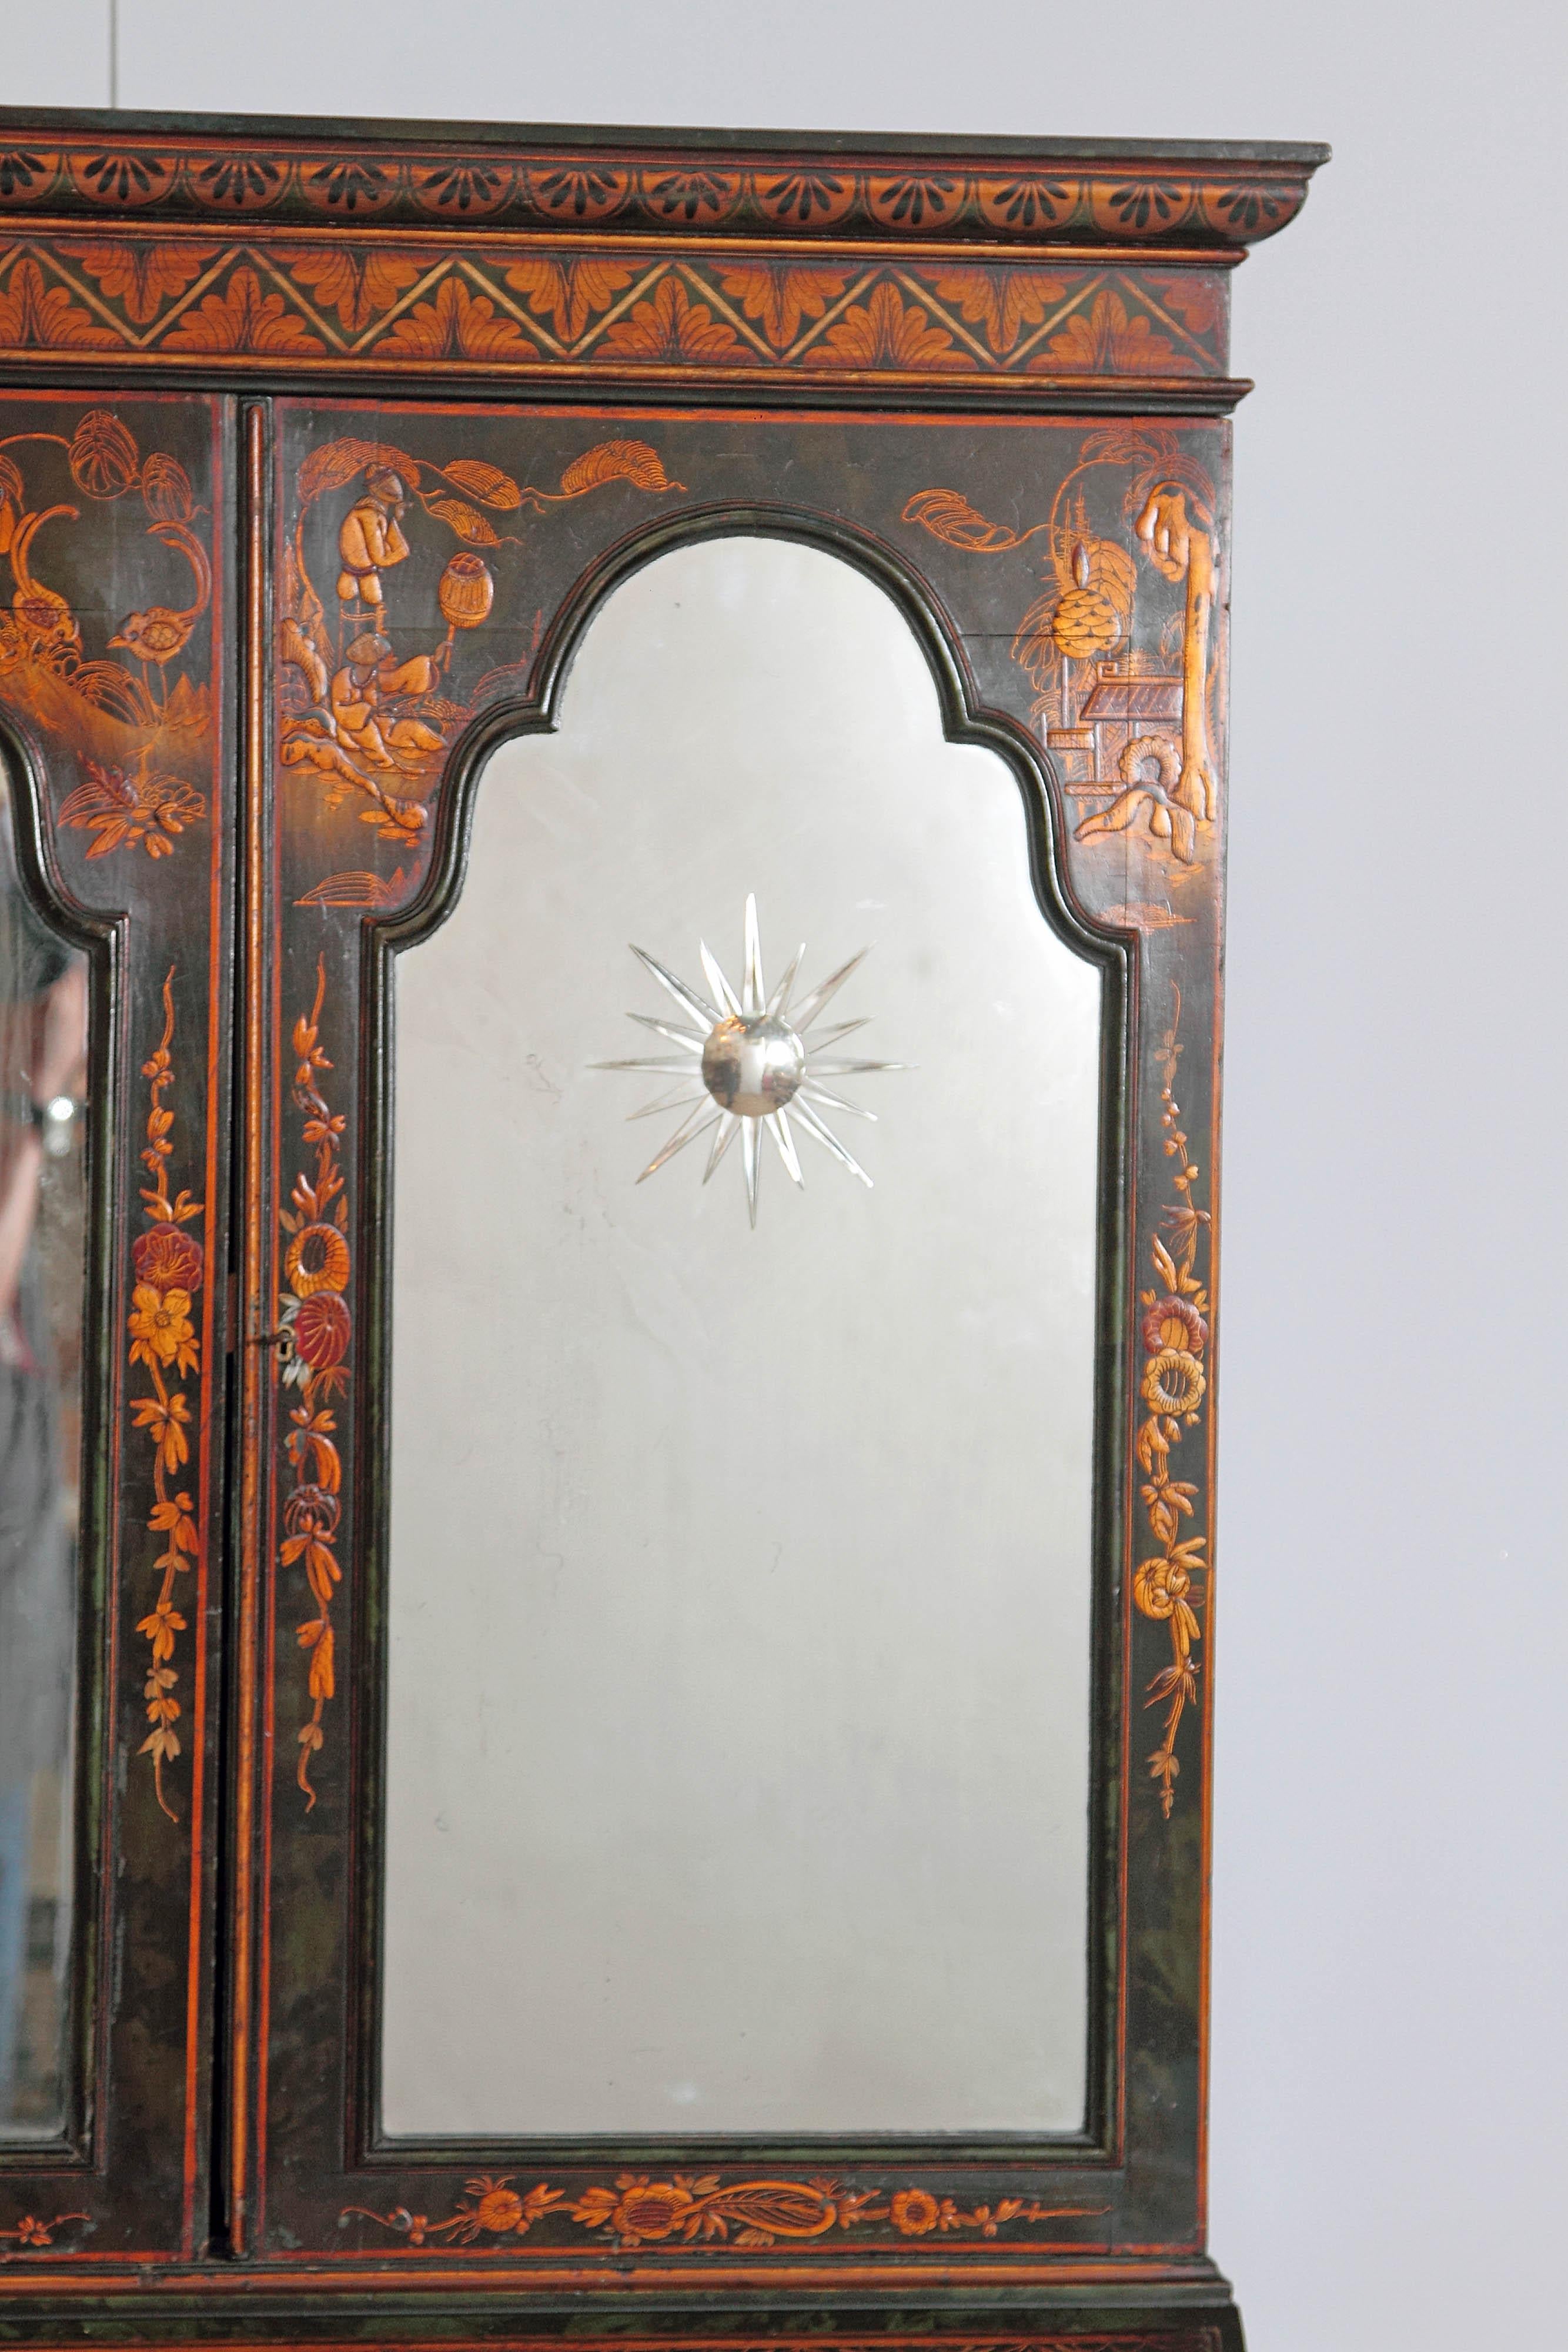 This early 20th century five-drawer secretary is made of wood stained in a deep black color with chinoiserie. Adorning the facade of the secretary are intricate painted scenes of Chinese pastoral life. The sides have gold painted floral designs. The